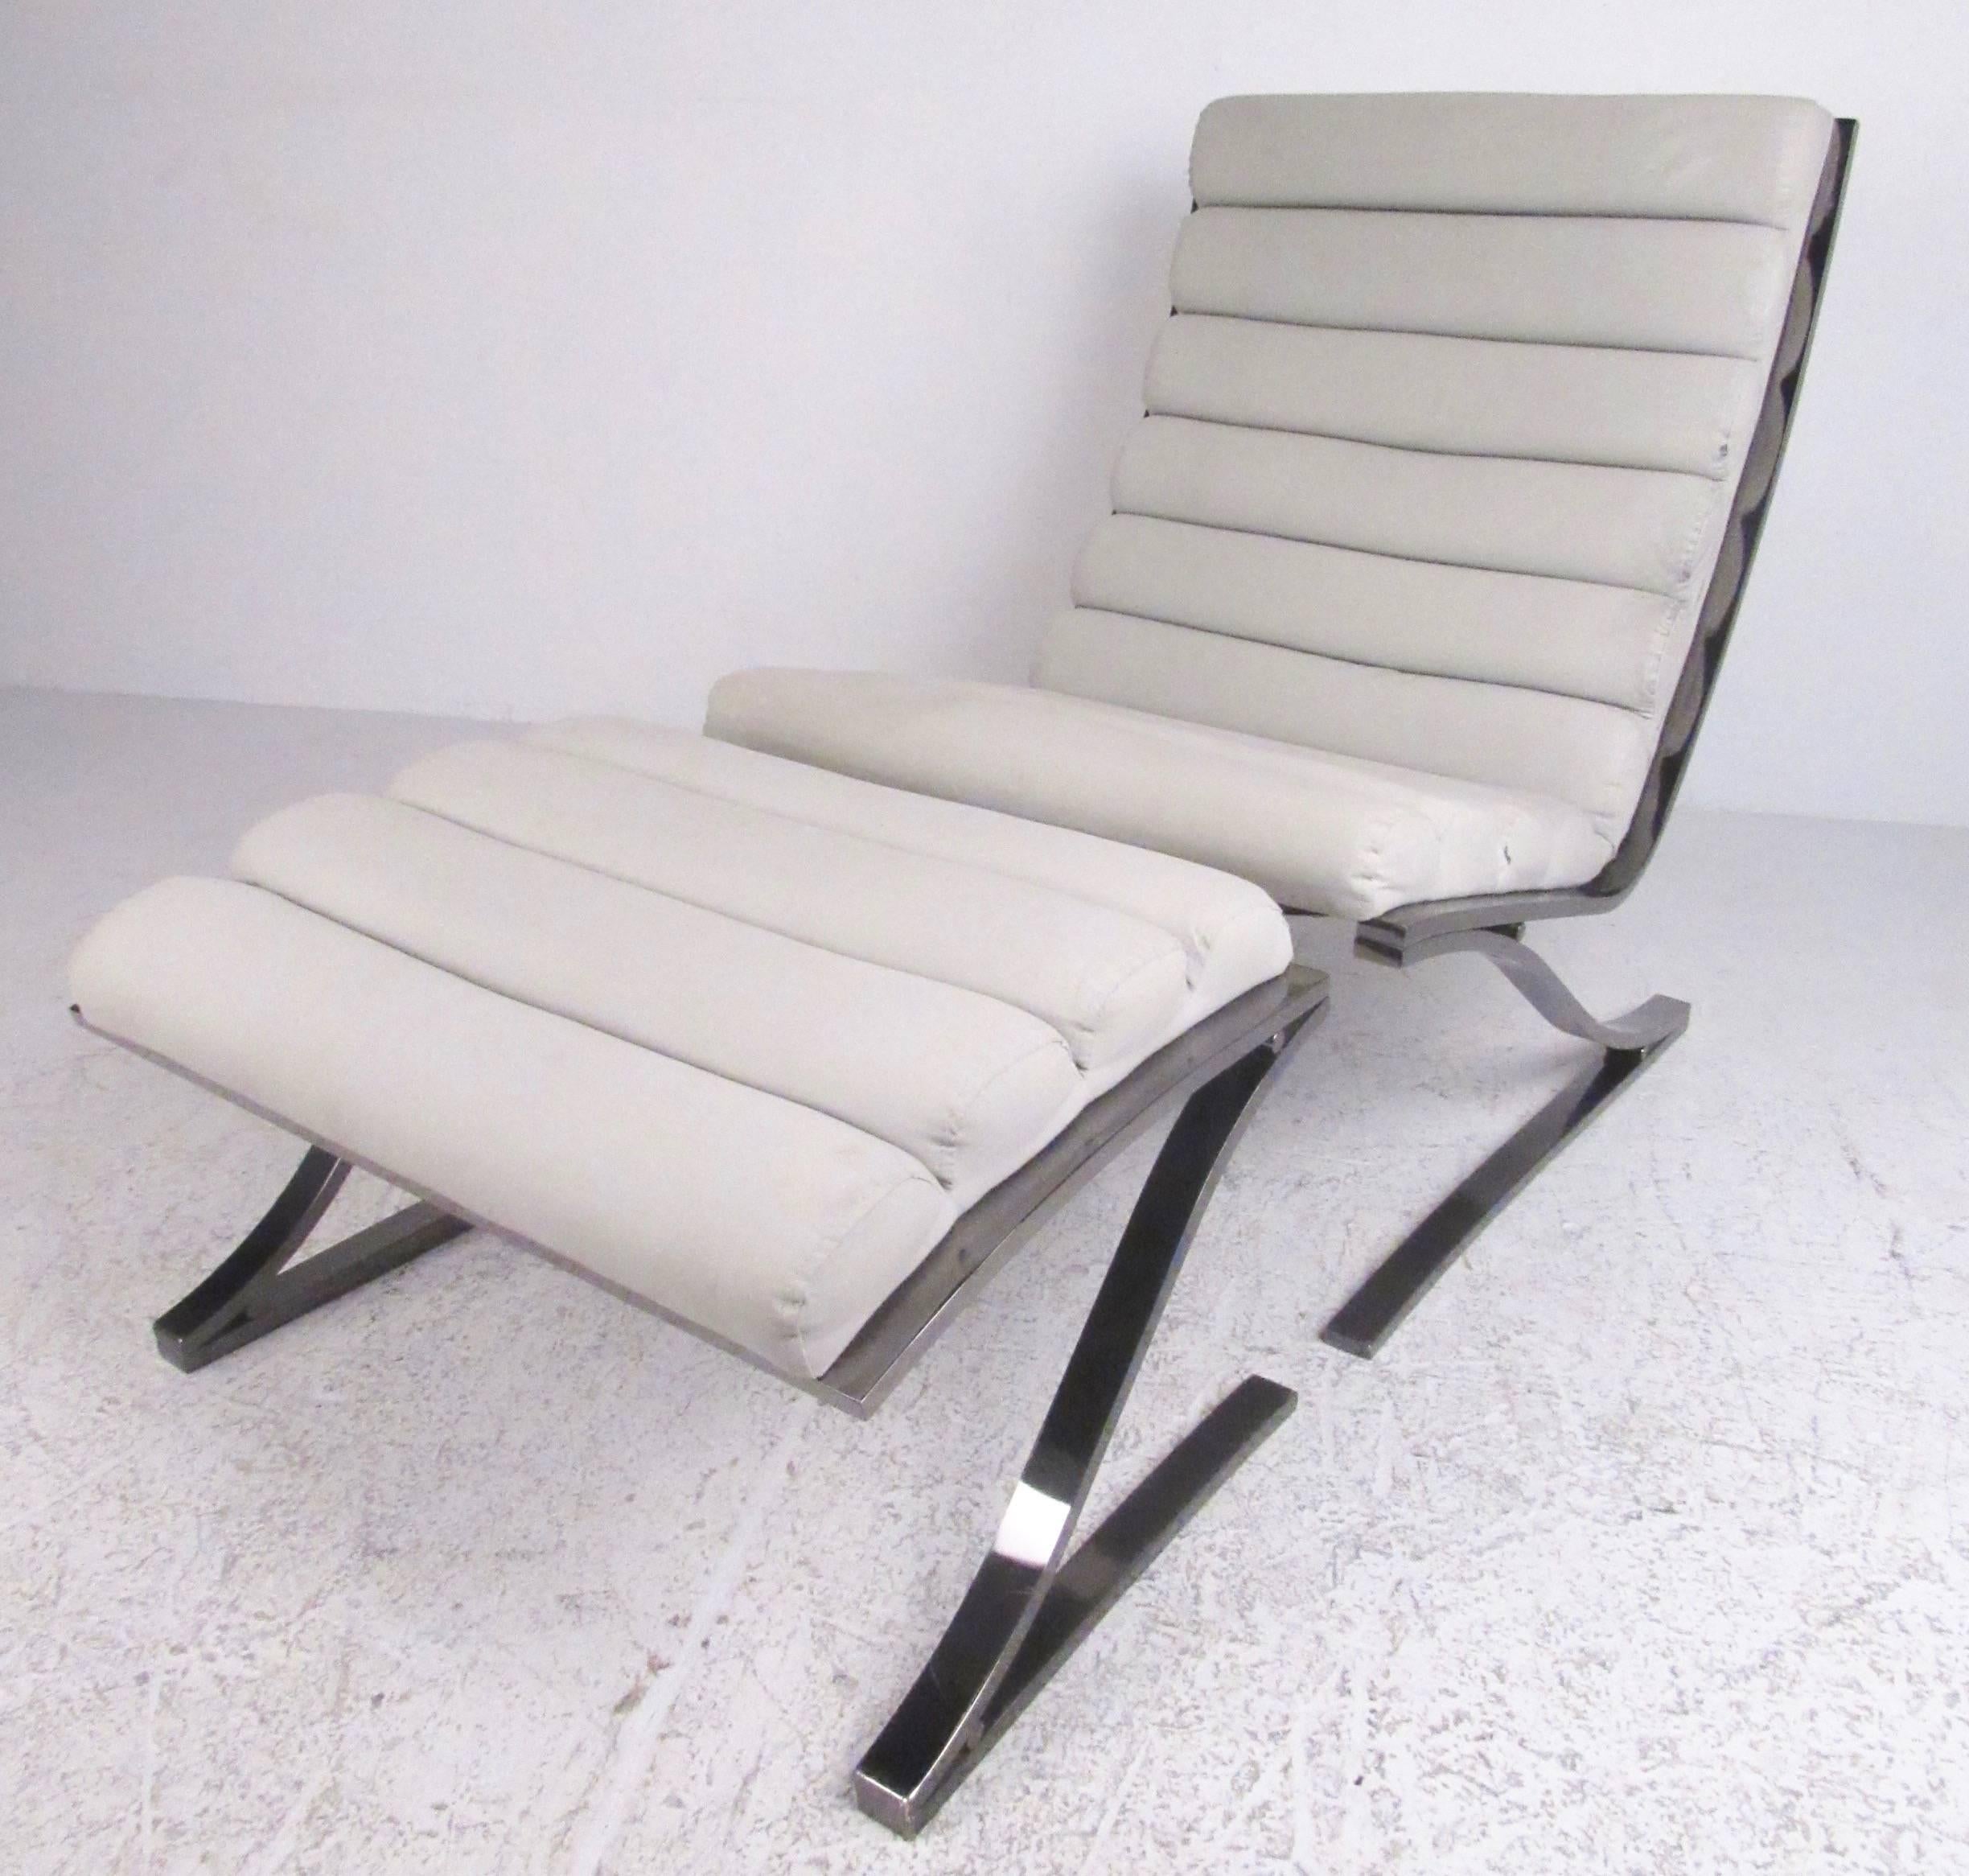 This elegant Mid-Century style lounge chair features gun metal chrome finish with ribbed upholstery, boasting a well-proportioned seating area with comfortable cantilever design. This contemporary modern lounge chair by DIA has a sleek modern design